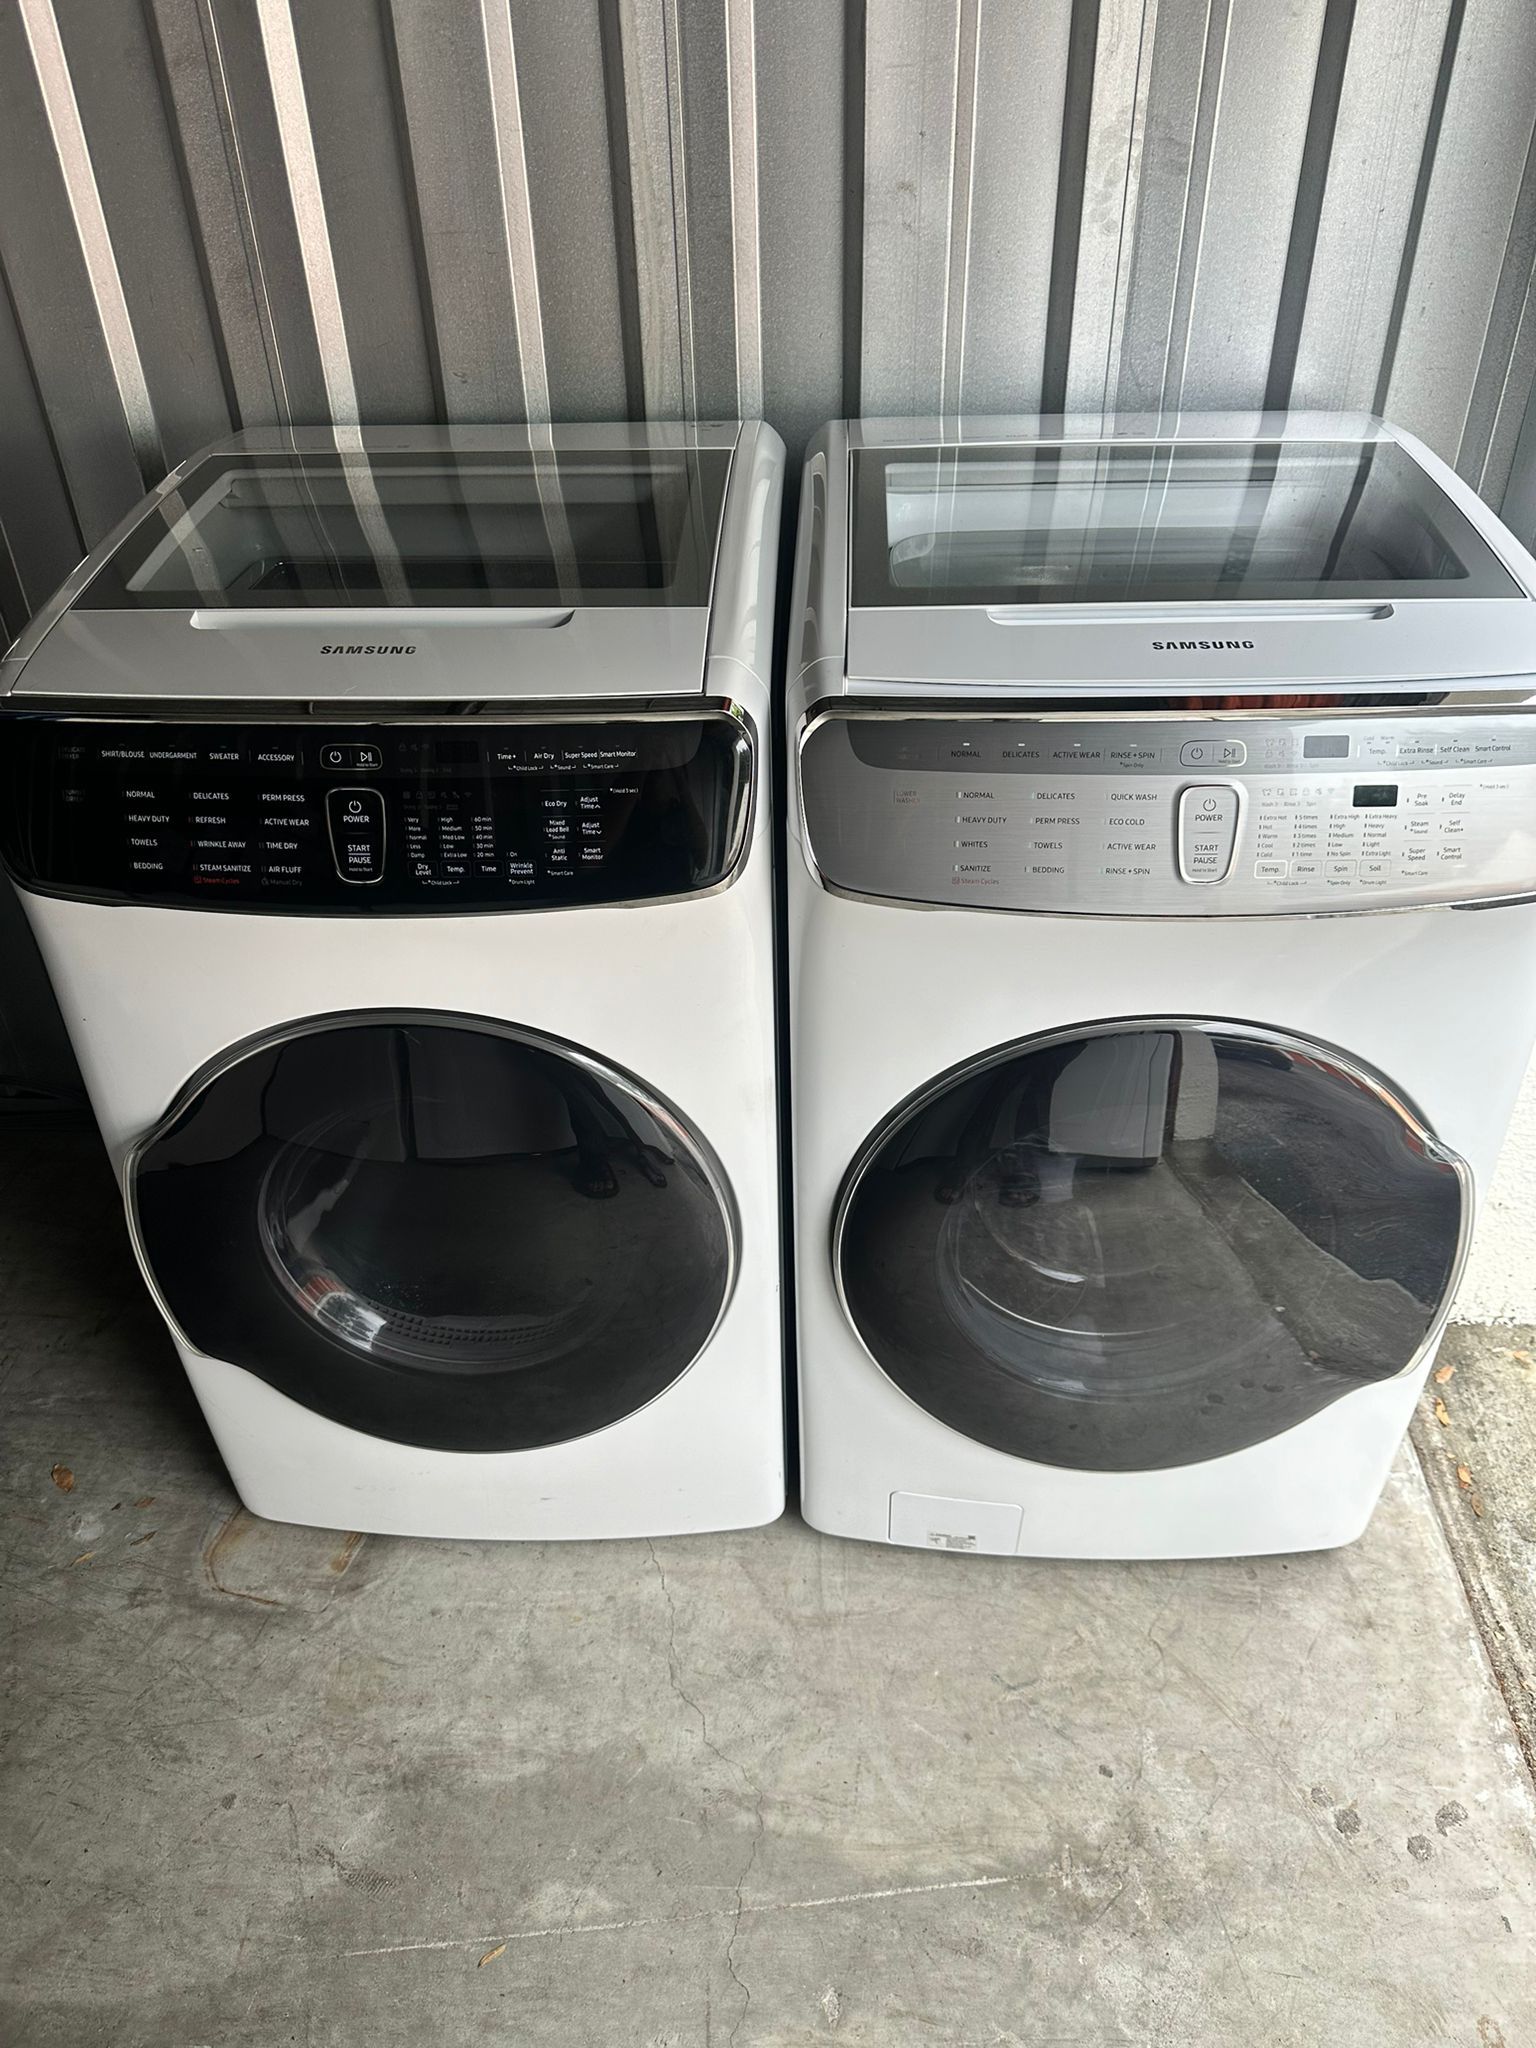 Smart washer and dryer set with flexwash 2 months warranty delivery available Price 900